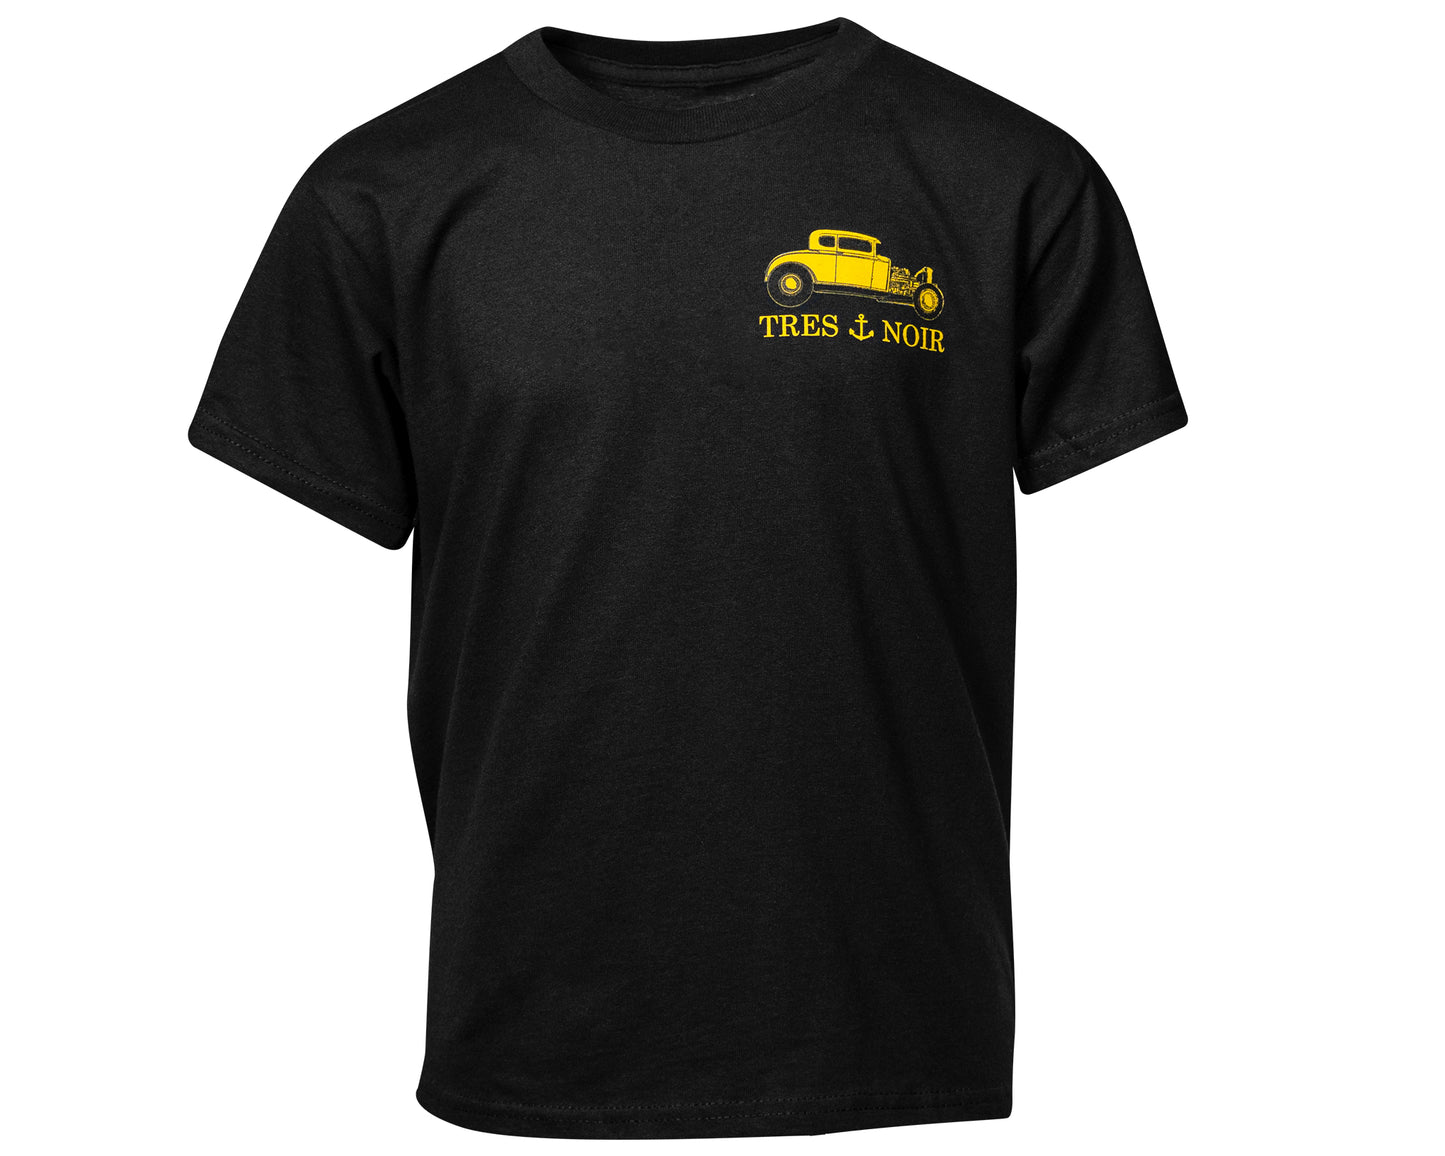 The Model A Youth Tee - Black - front